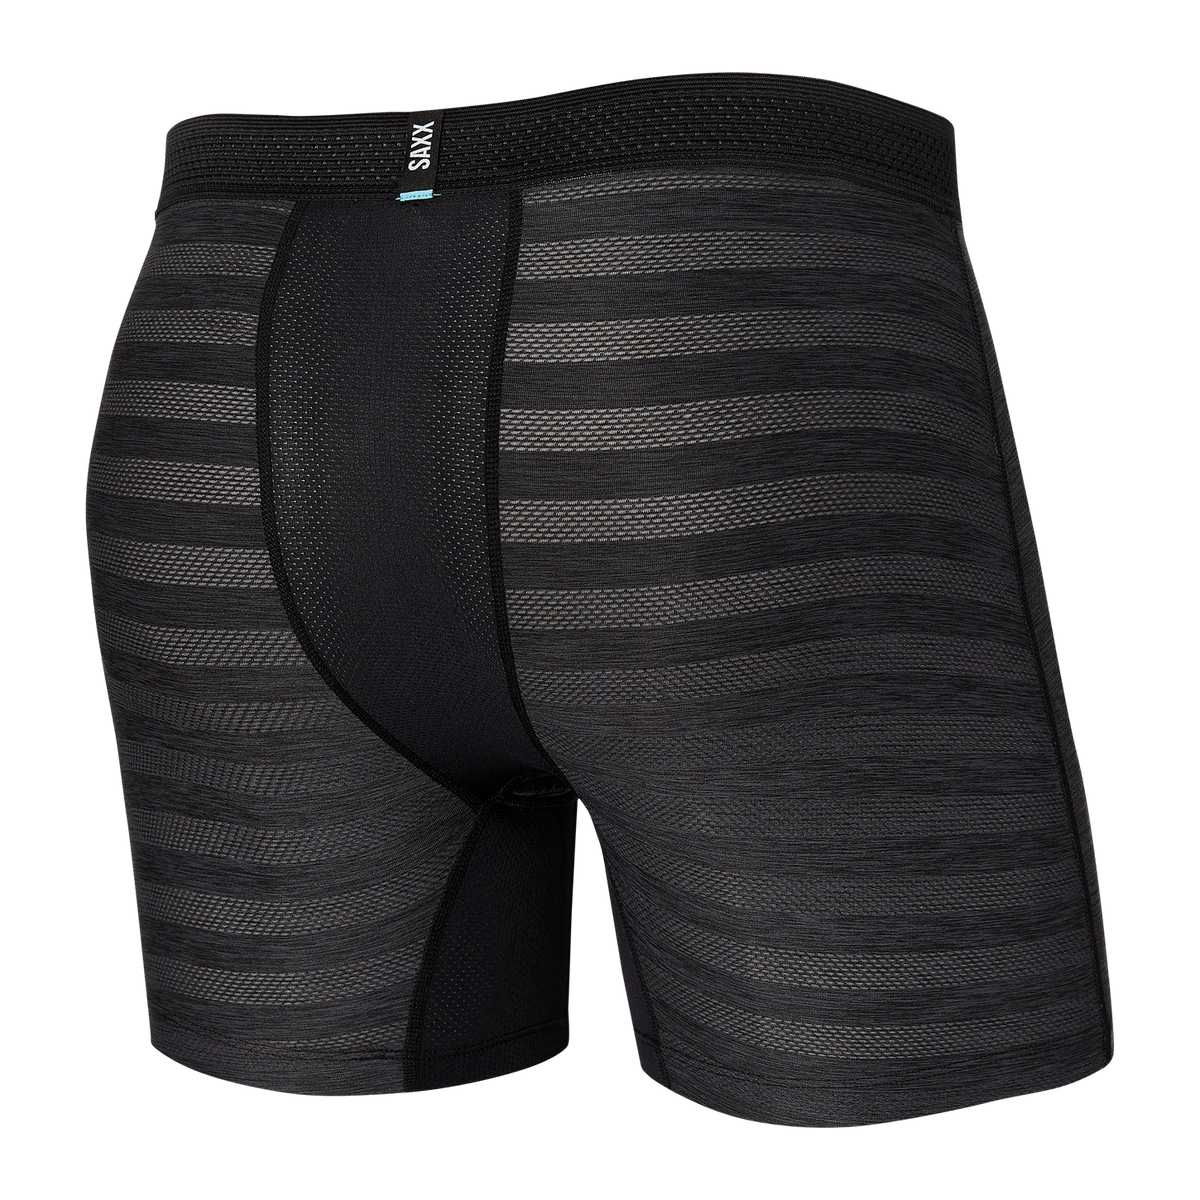 Saxx DropTemp Cooling Mesh Boxer w/ Fly